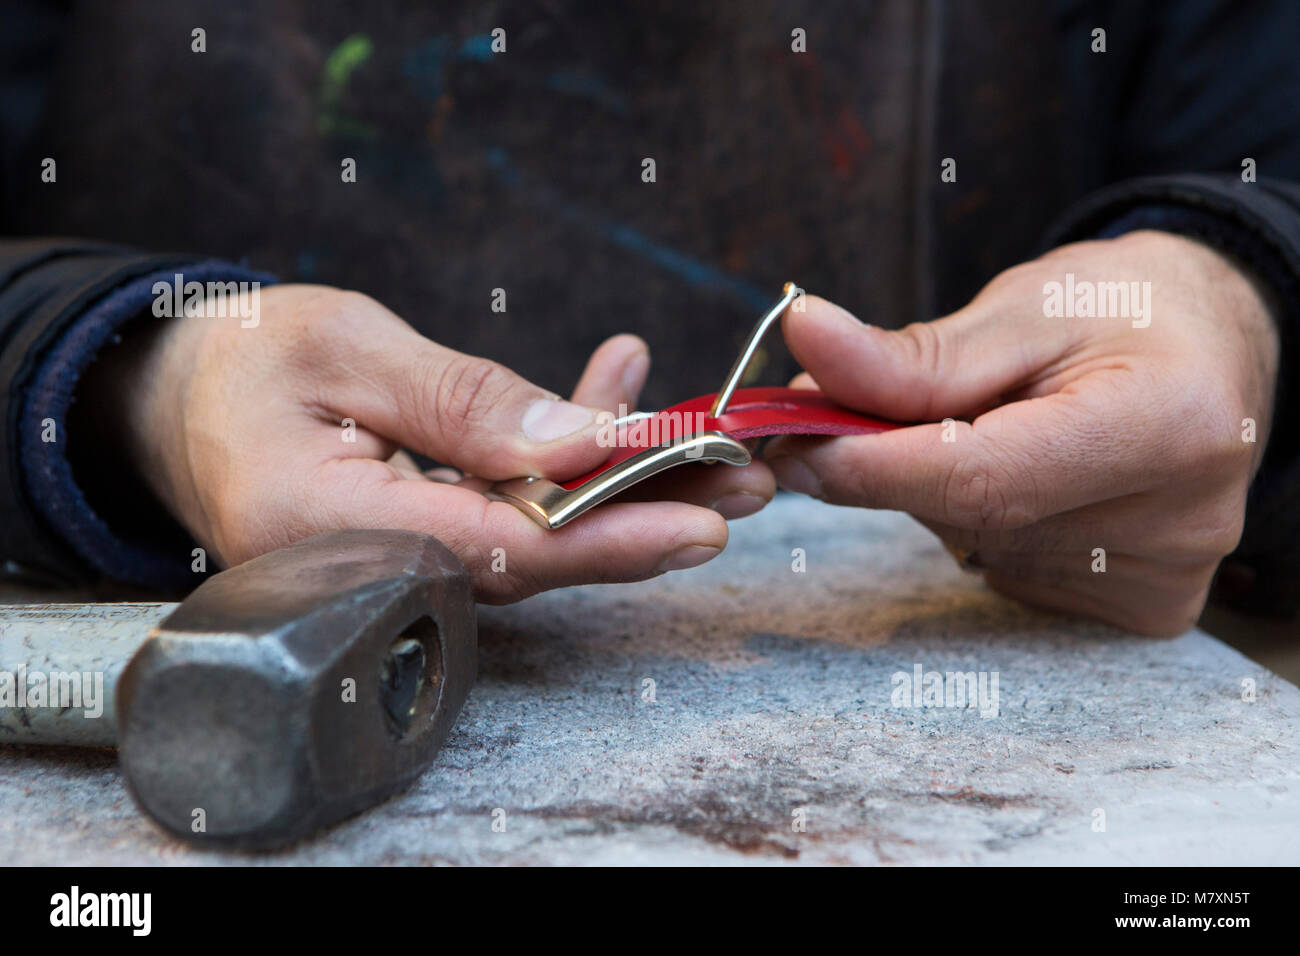 Artisan leather worker making a belt. Stock Photo